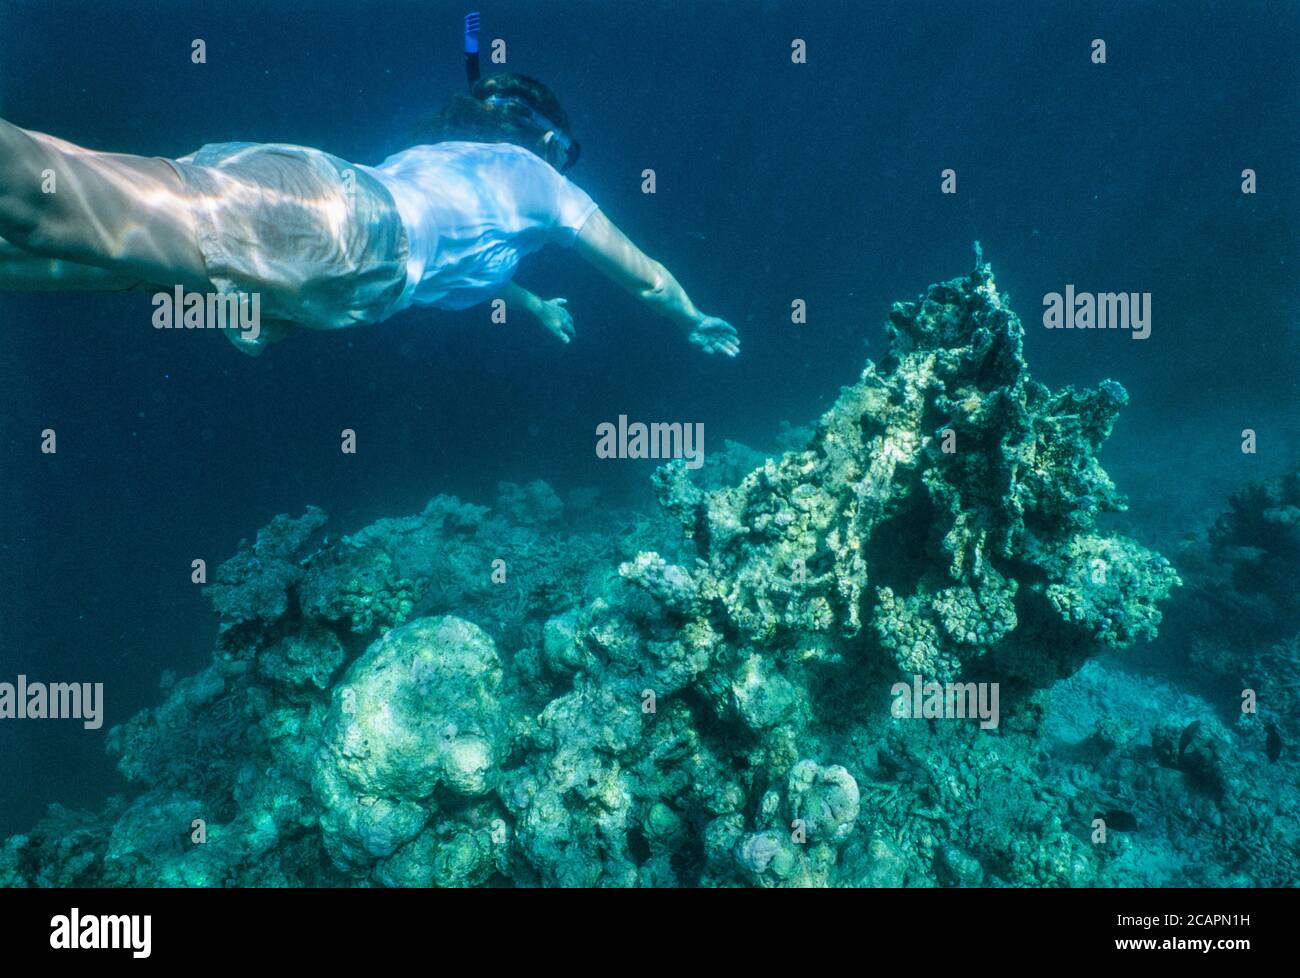 Archive image: woman snorkeller examining coral bleaching in the Maldives, c. 2005, possibly Ari Atoll. Stock Photo